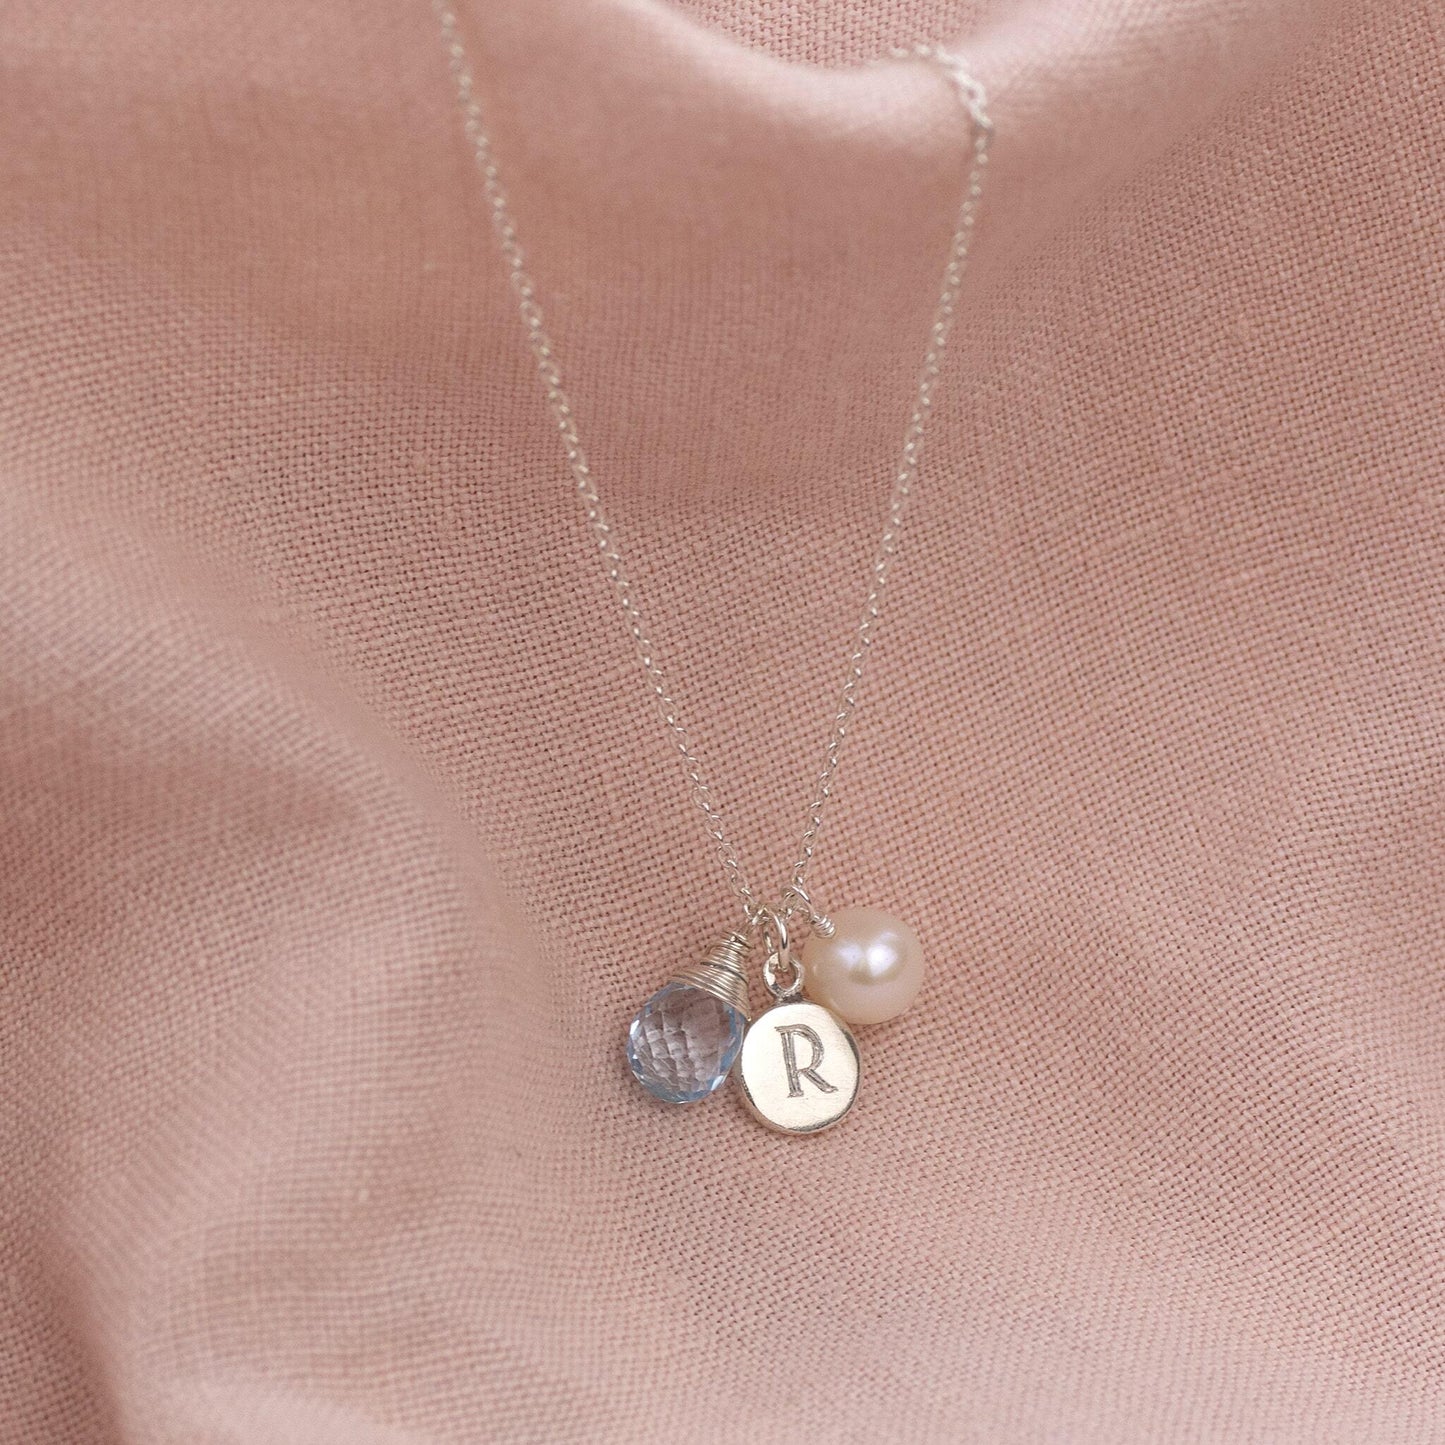 Christmas Gift for Her - Personalised Birthstone & Initial Necklace